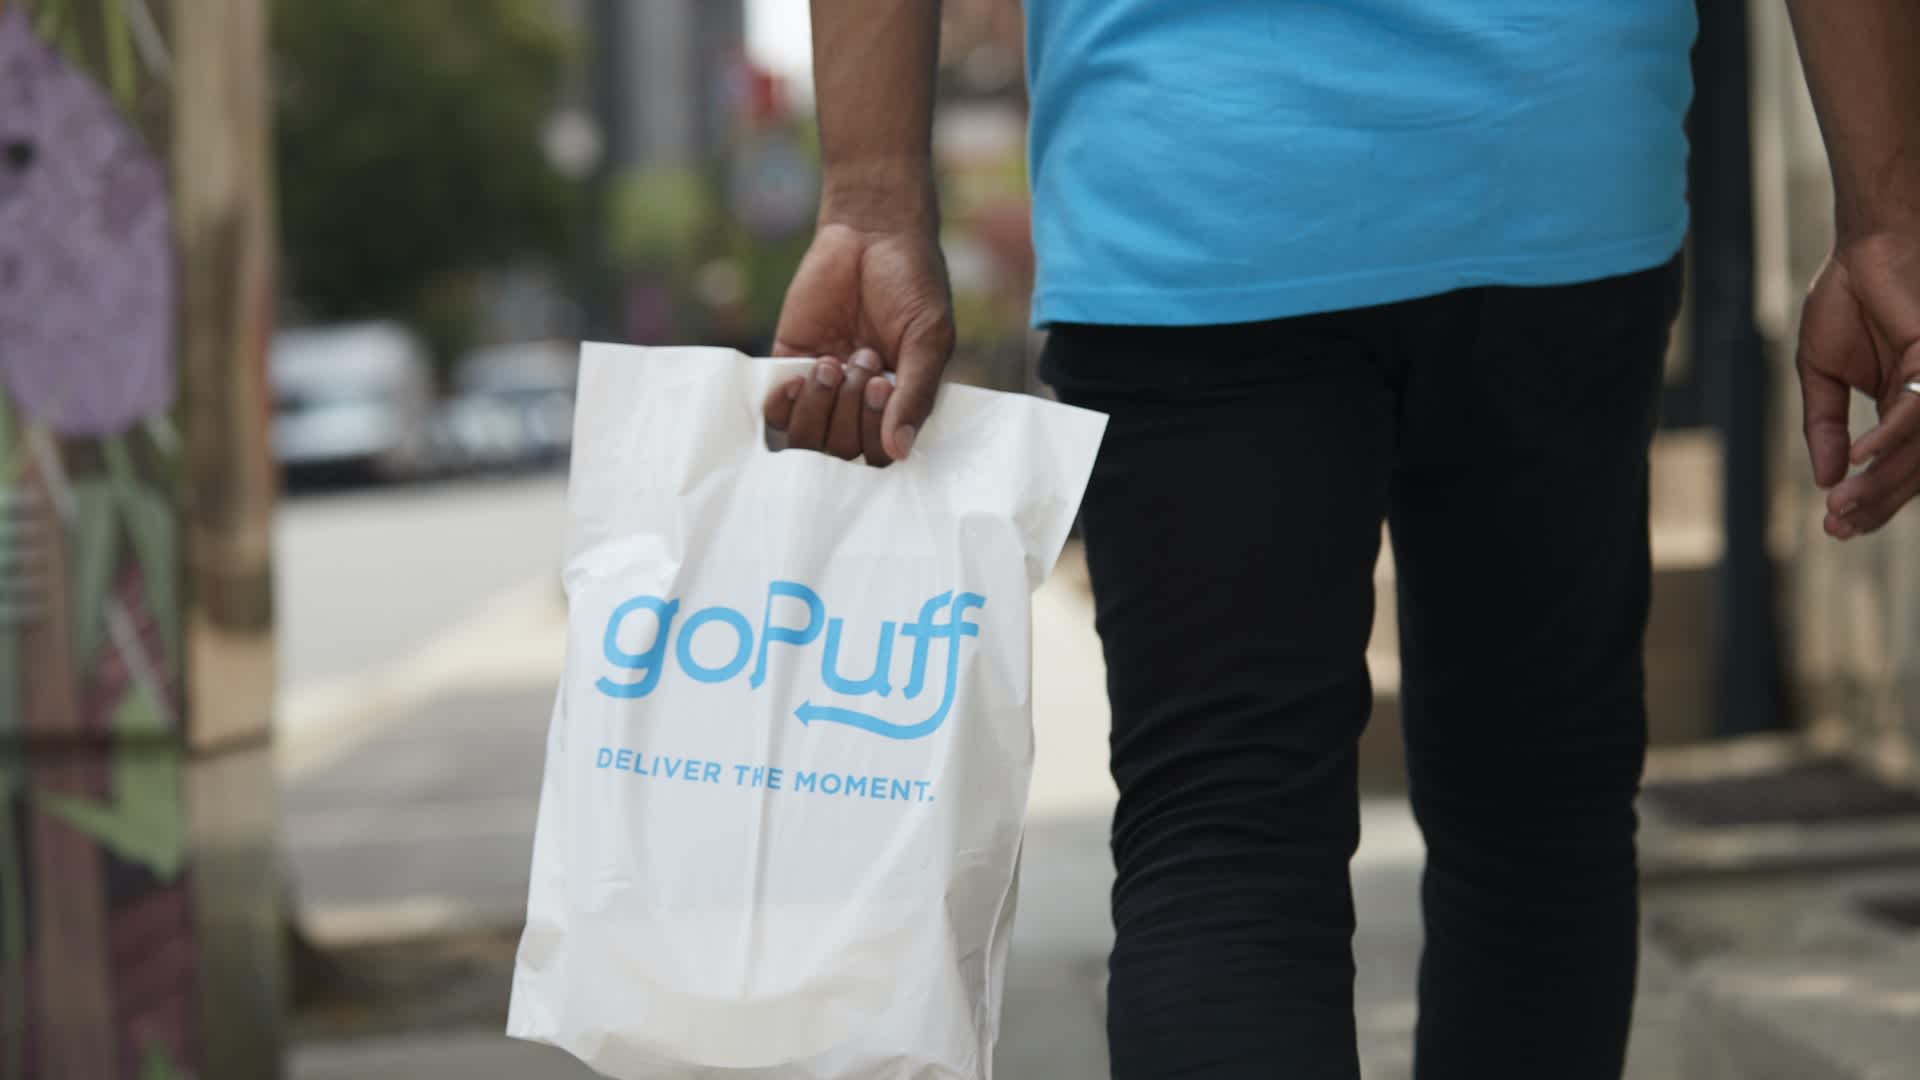 man carrying bag labeled "Gopuff: Deliver the Moment"